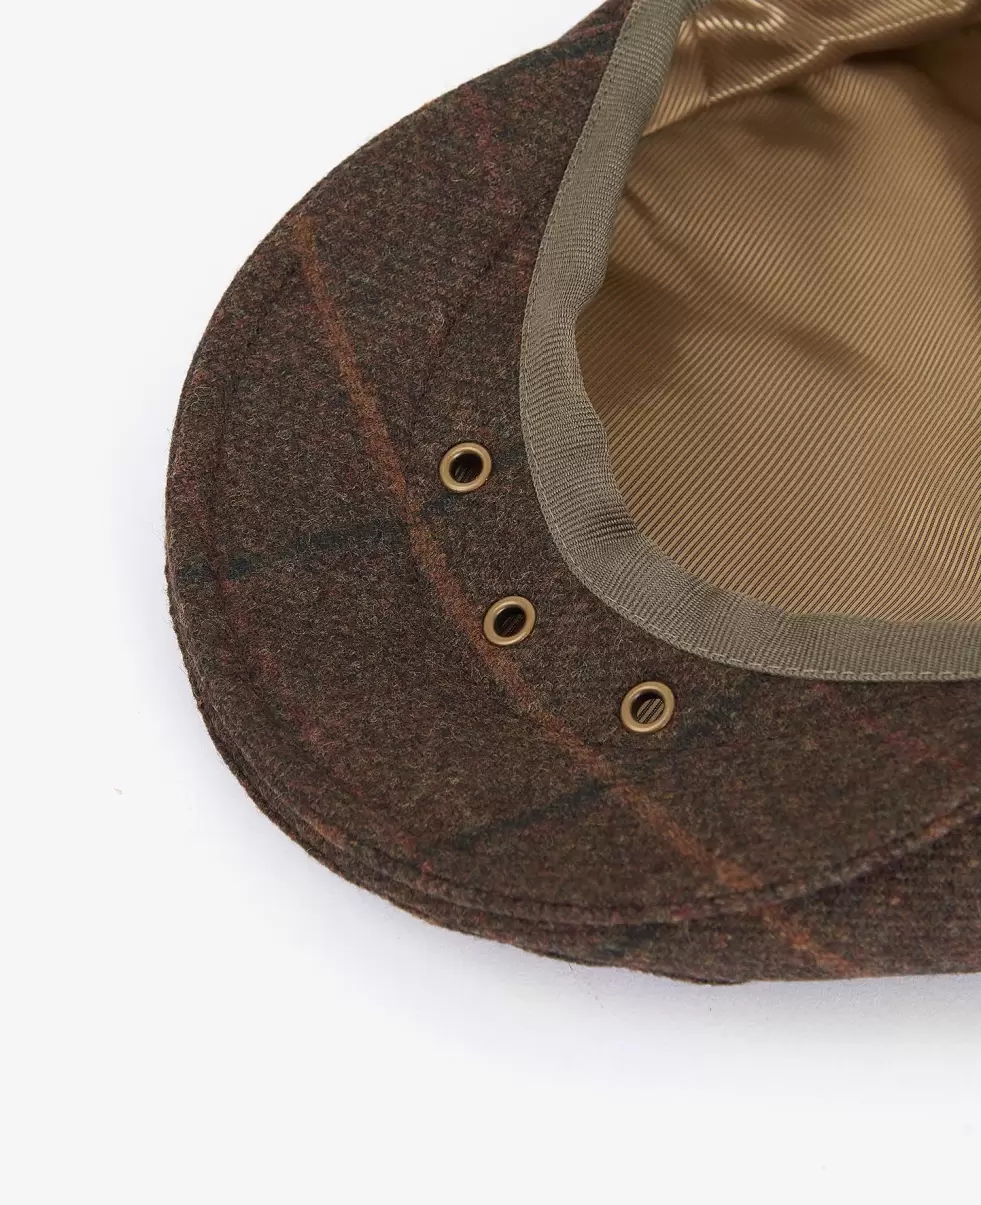 Hats & Gloves Barbour Crieff Flat Cap Brown Accessories Early Bird - 2